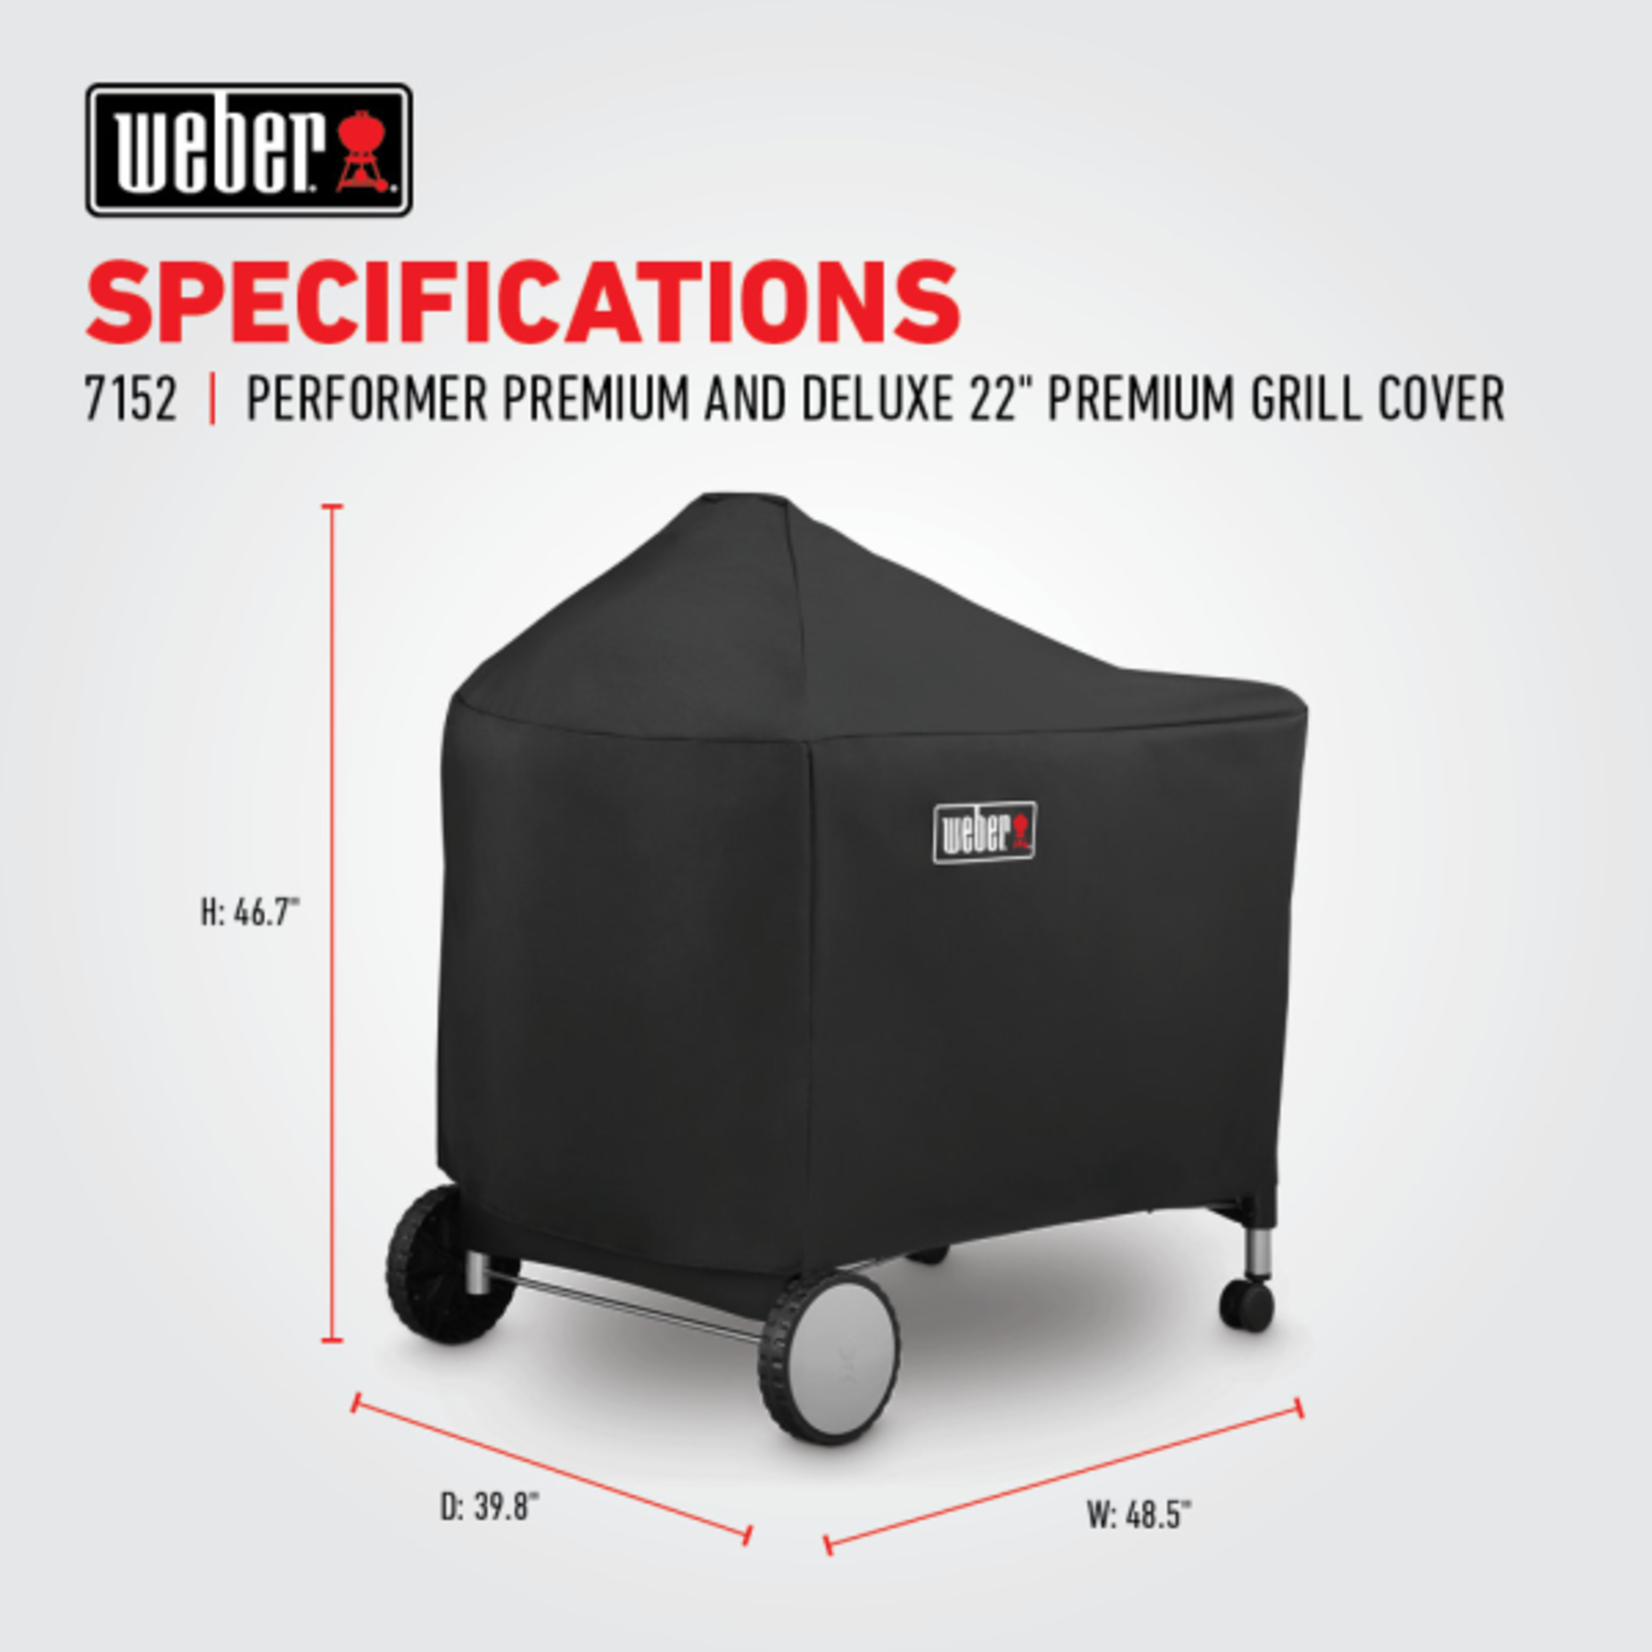 Weber Premium Grill Cover - Fits Performer Premium and Deluxe 22' charcoal grills